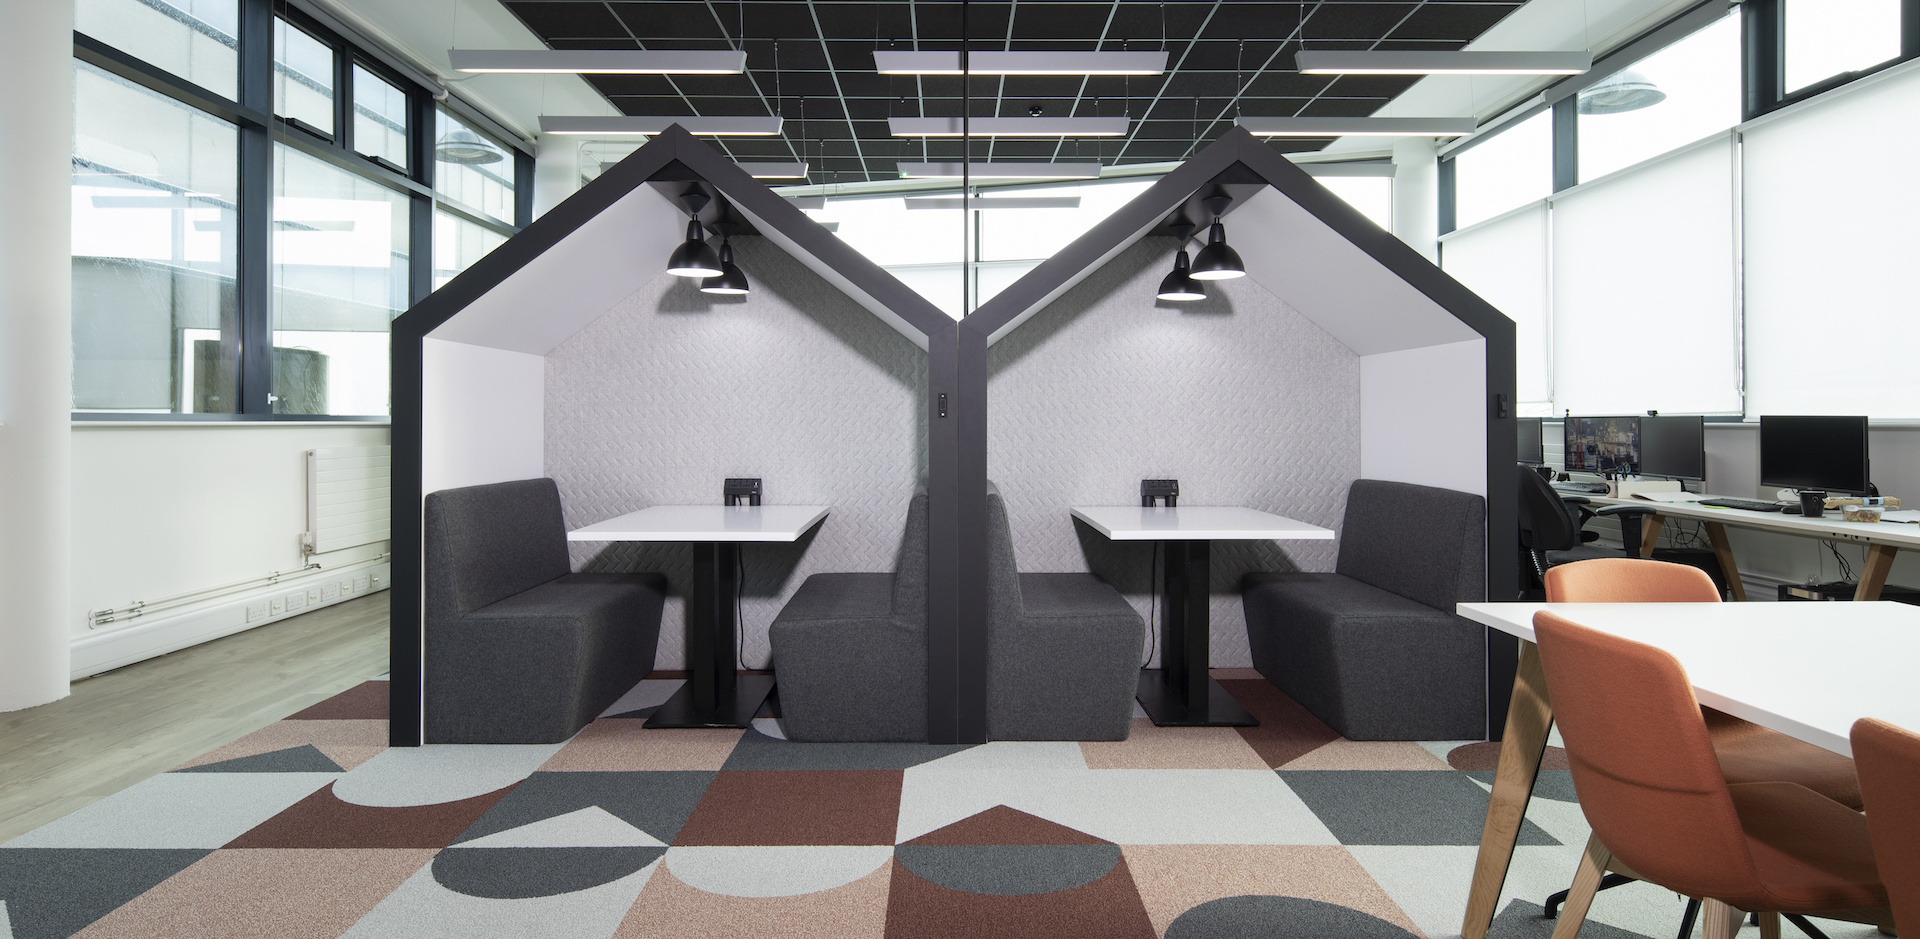 Pitched roof Shack meeting booths shown as a side view